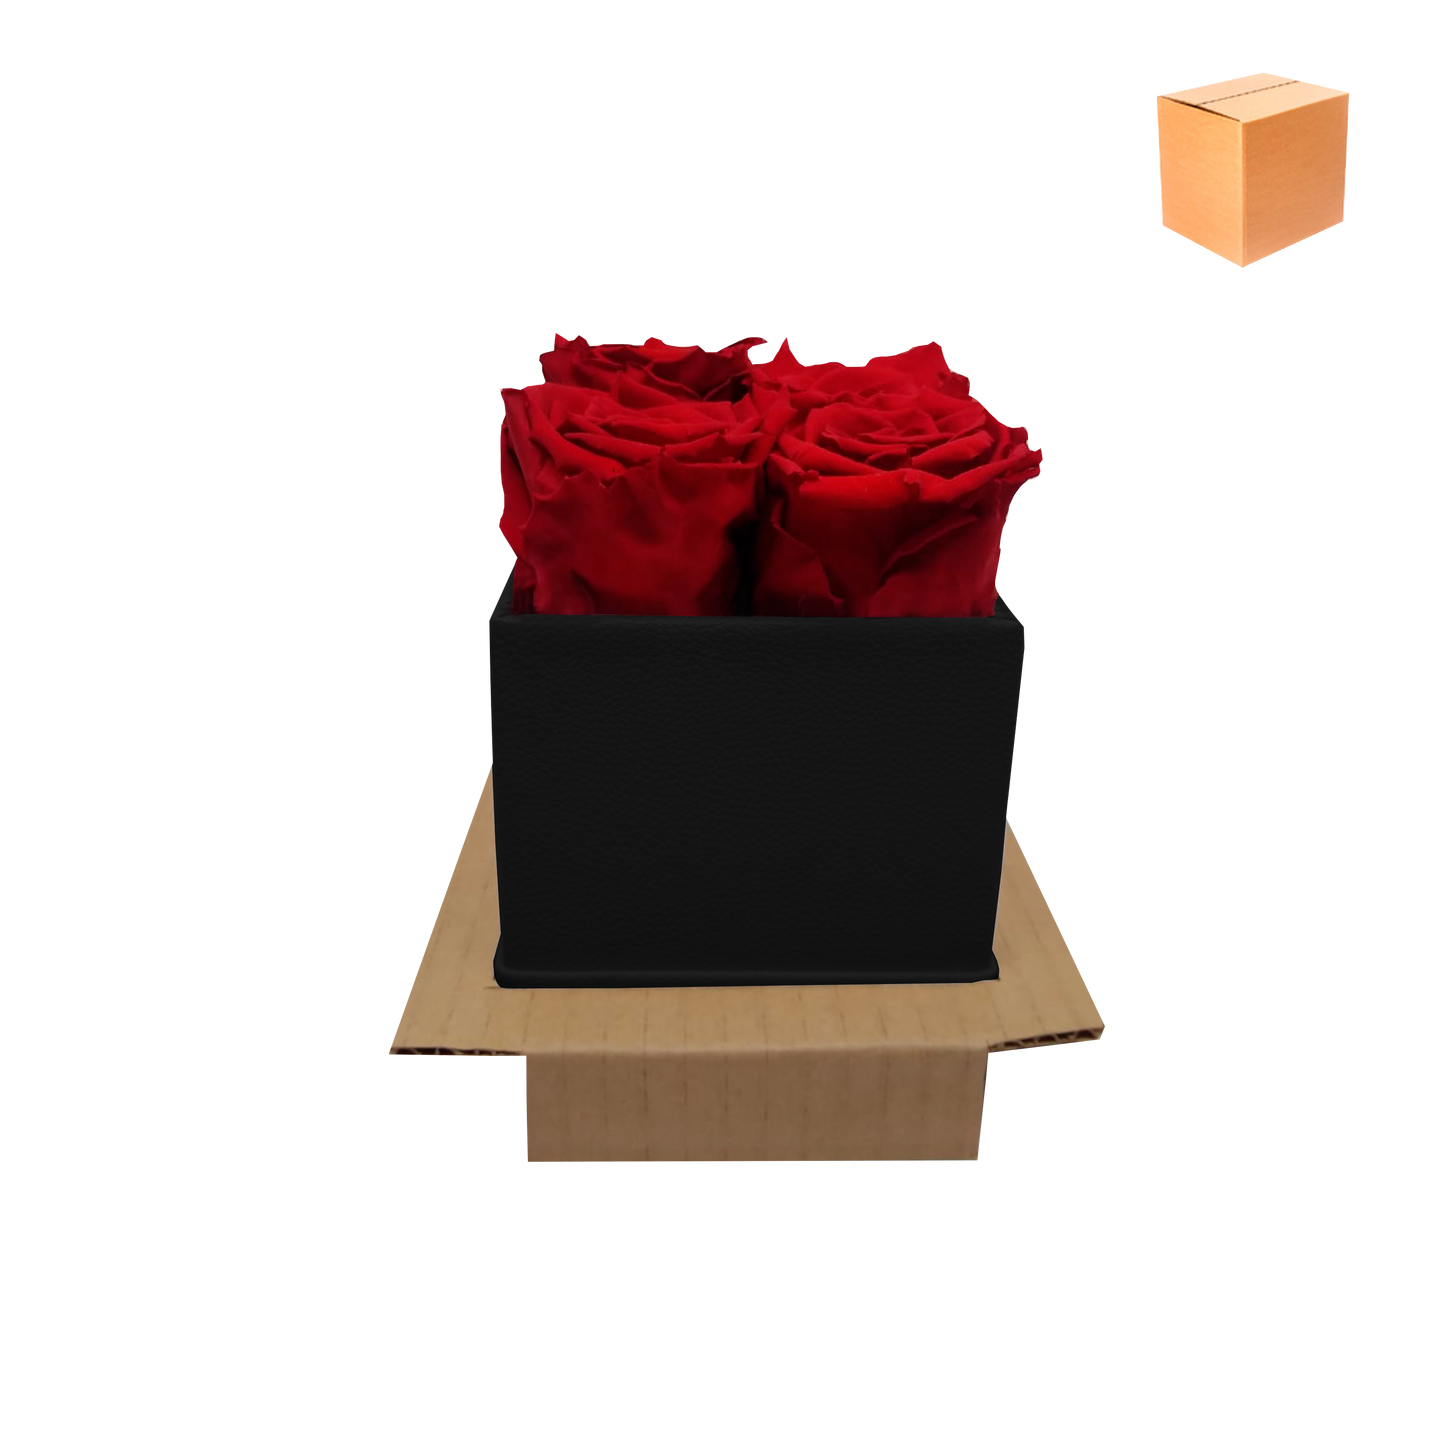 LUXURY ROSEAMOR 4 PRESERVED ROSES ARRANGEMENT - SQUARE PU LEATHER BOX